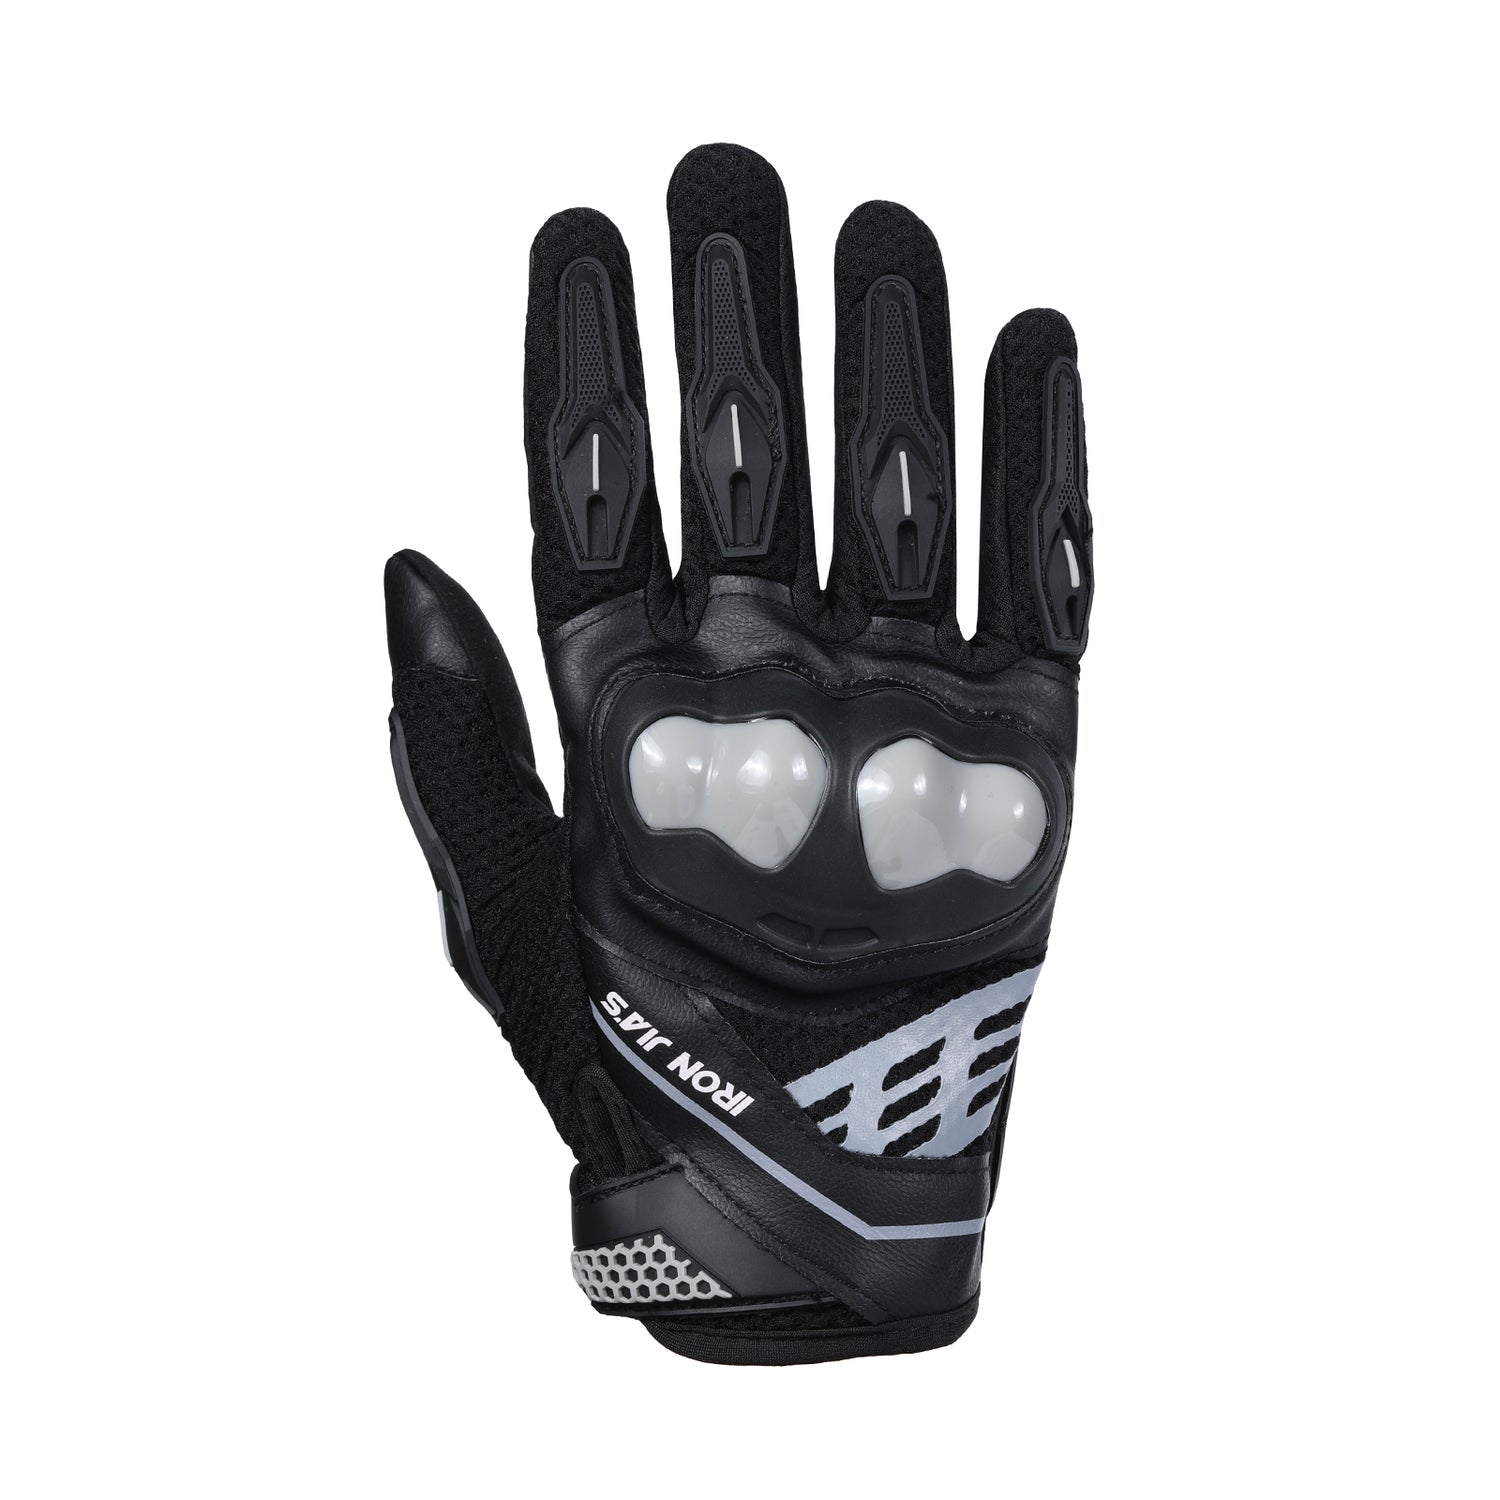 IRONJIAS Summer Breathable Motorcycle Protective Gloves